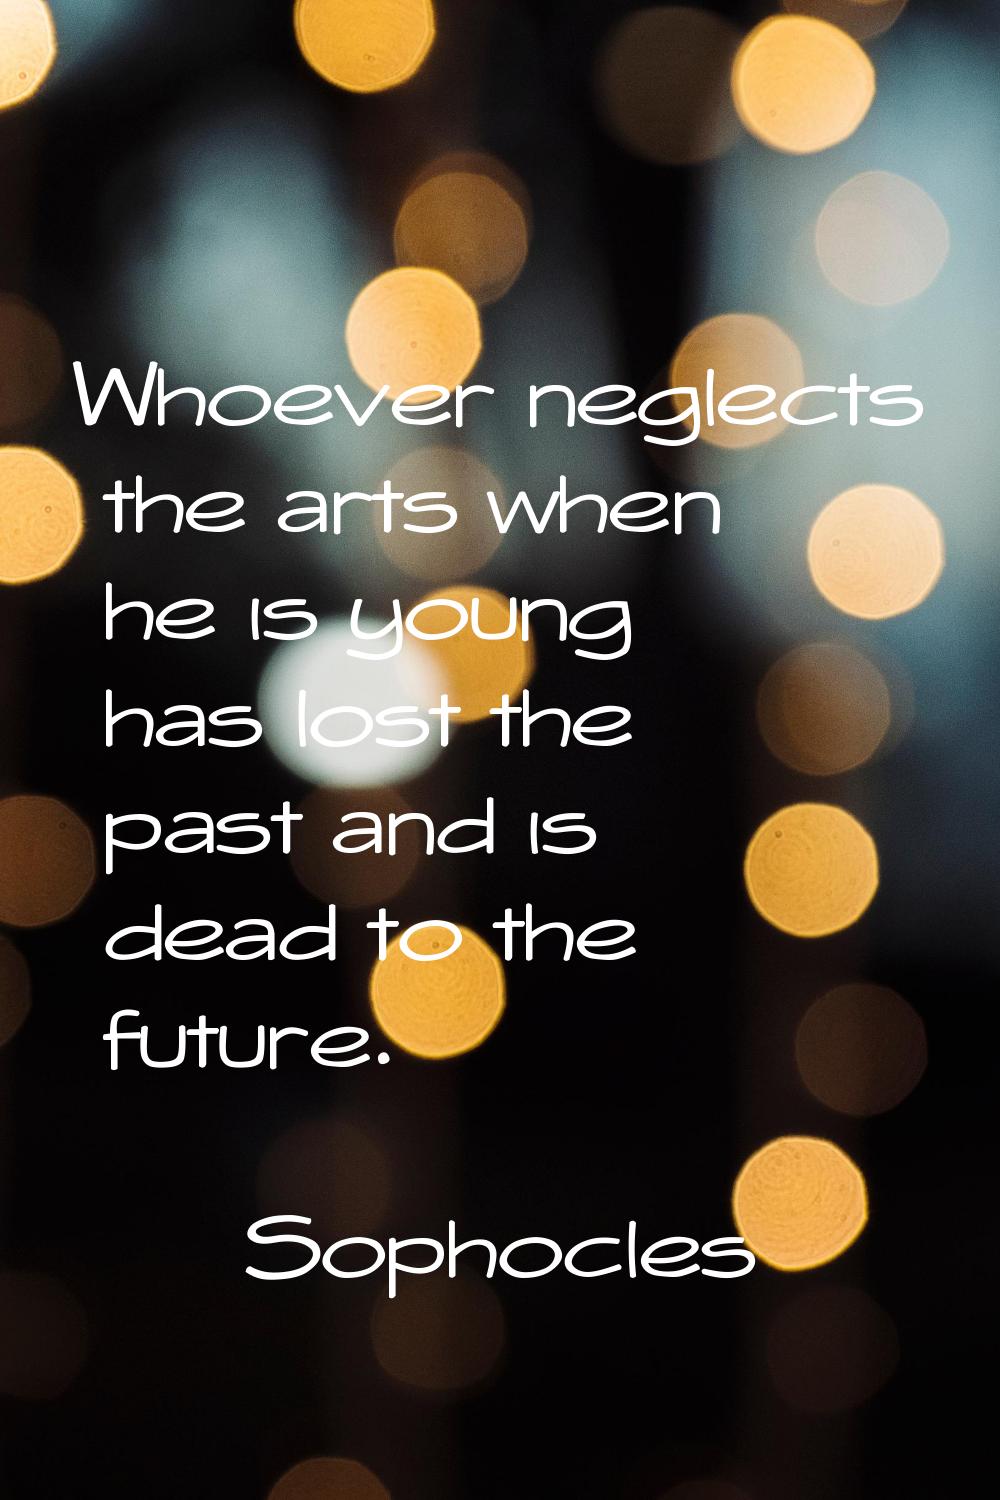 Whoever neglects the arts when he is young has lost the past and is dead to the future.